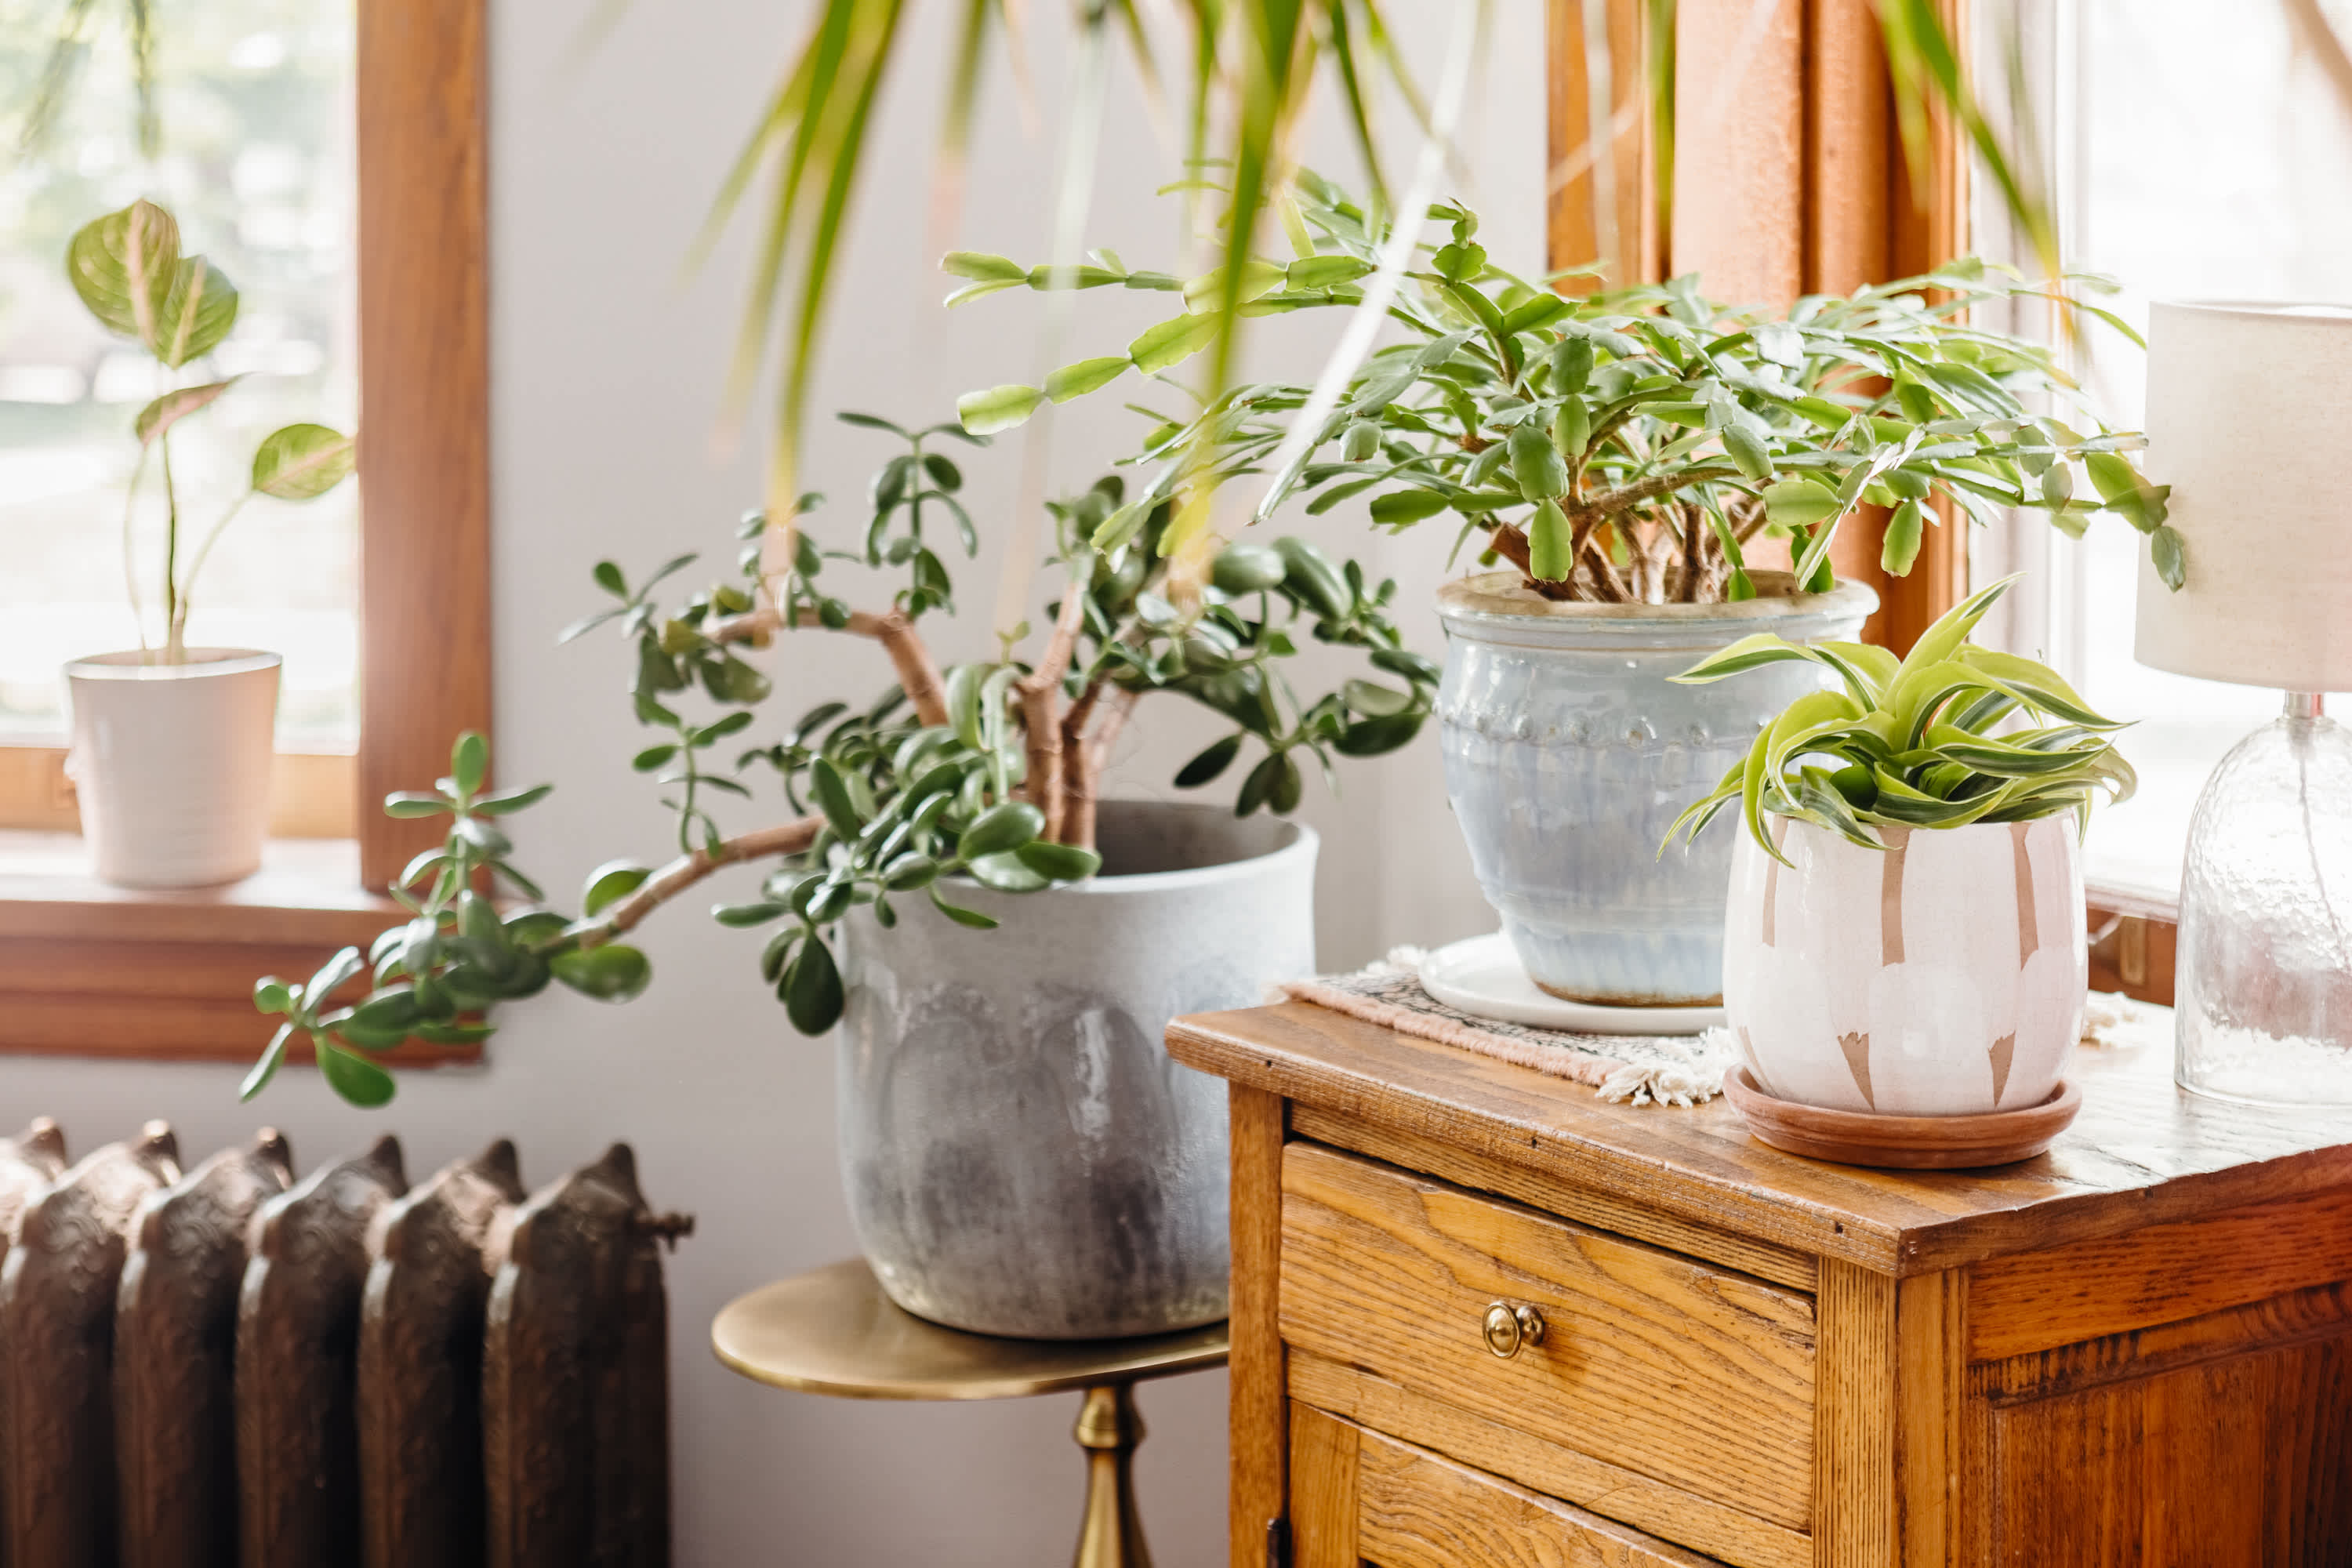 Think your house plants are all non-toxic? Think again….